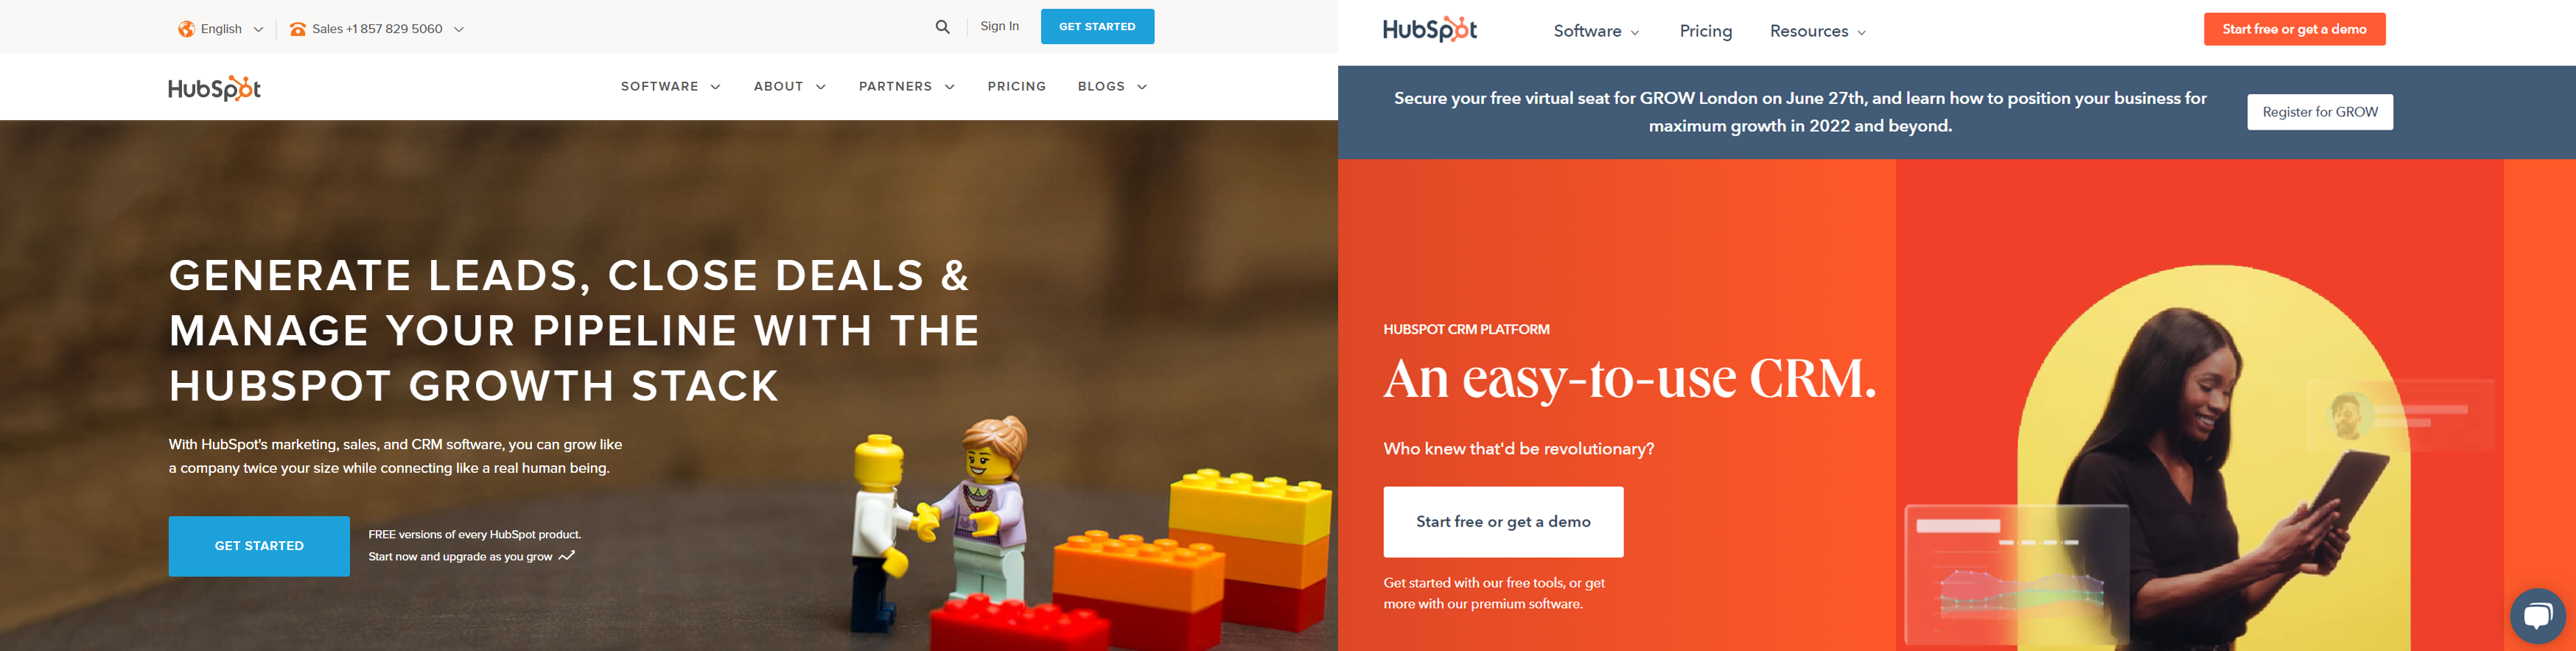 HubSpot website before and after redesign